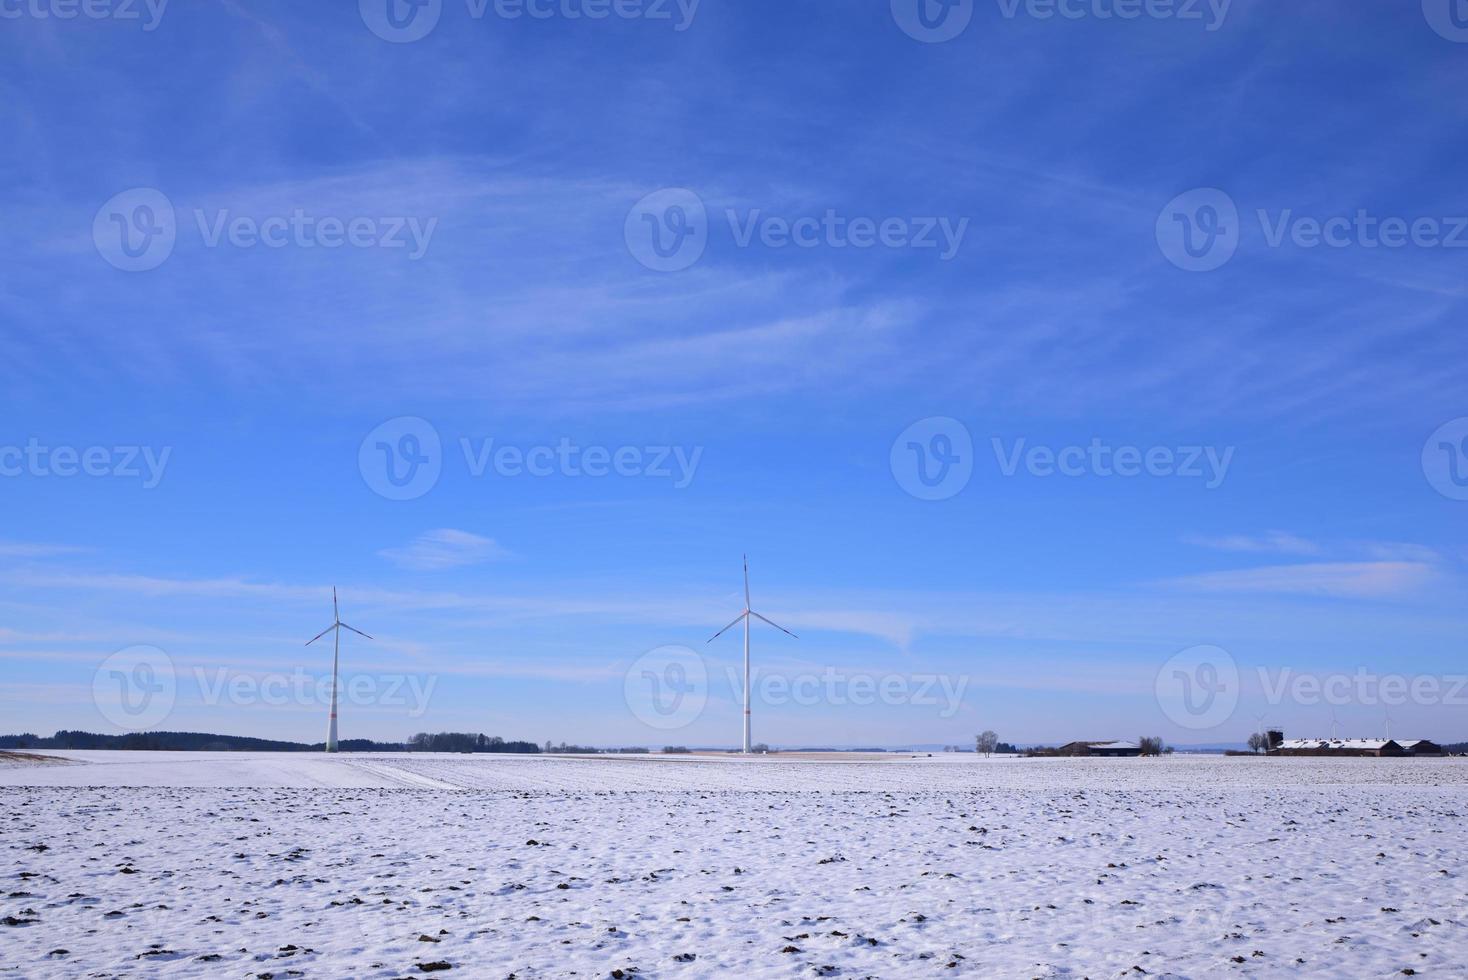 Winter flat landscape with snow up to the horizon in Swabia. Wind turbines can be seen in the background photo